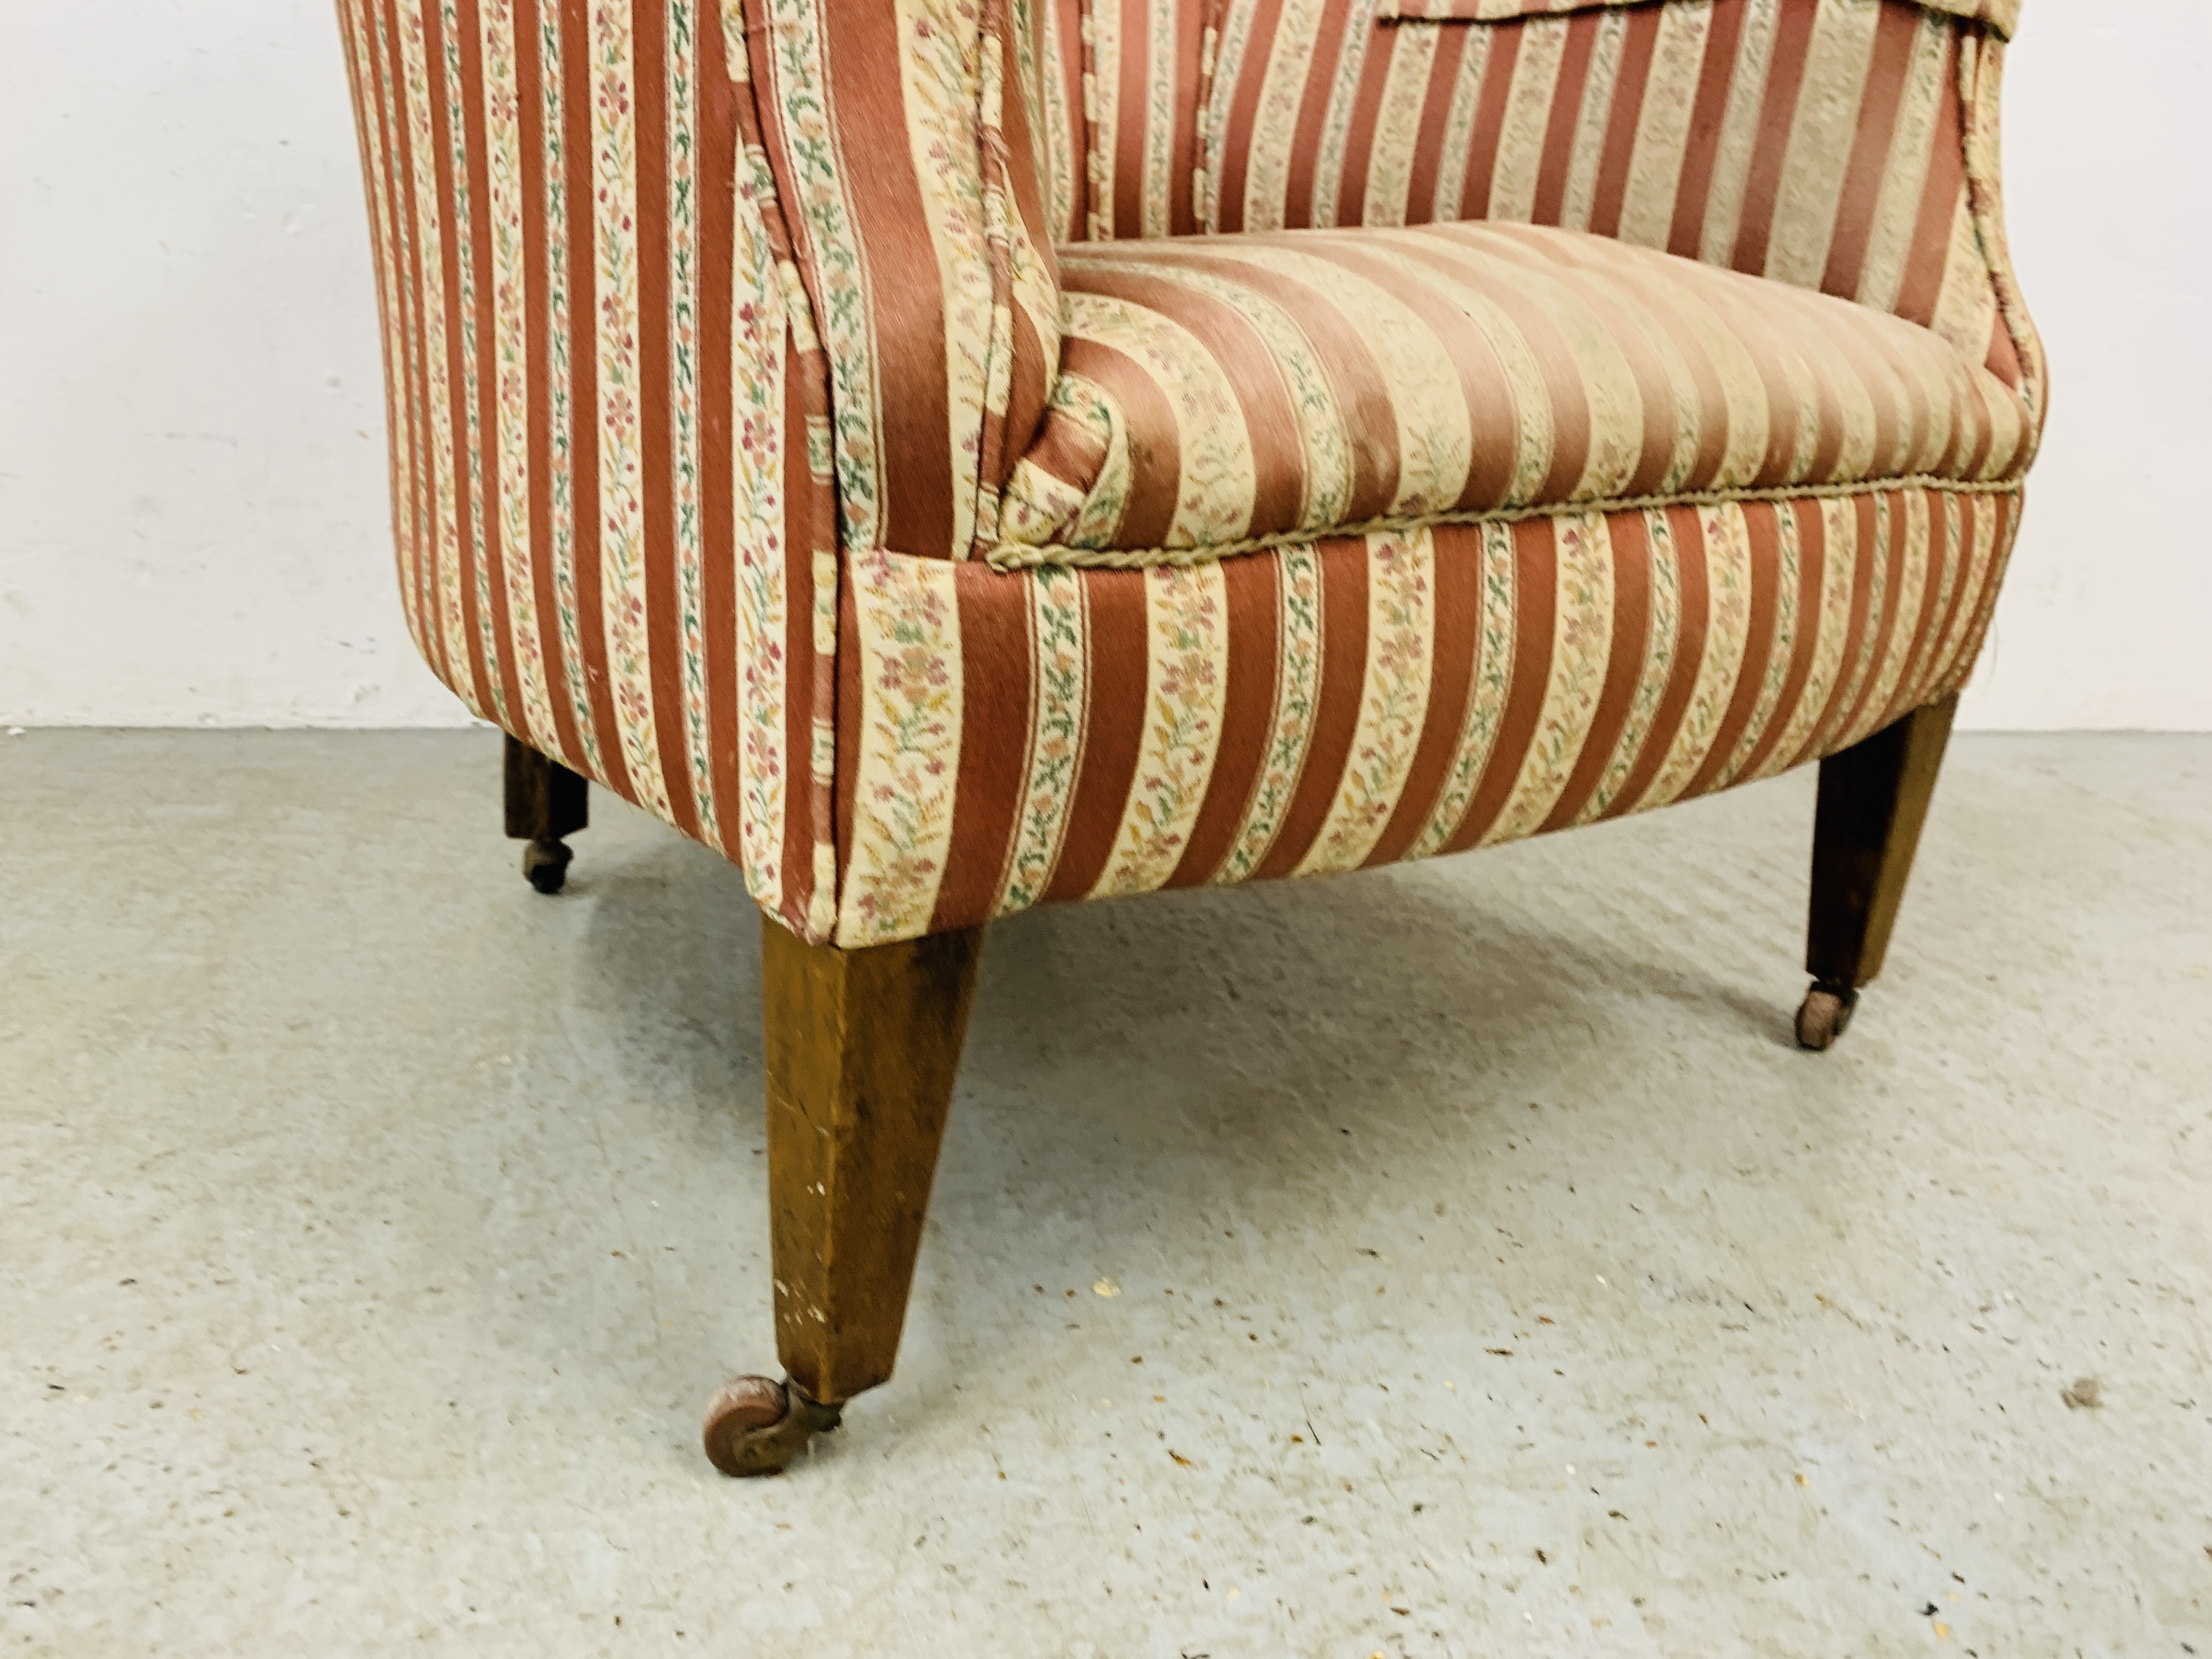 ANTIQUE TUB CHAIR, ORIGINAL STRIPPED MATERIAL, - Image 4 of 7